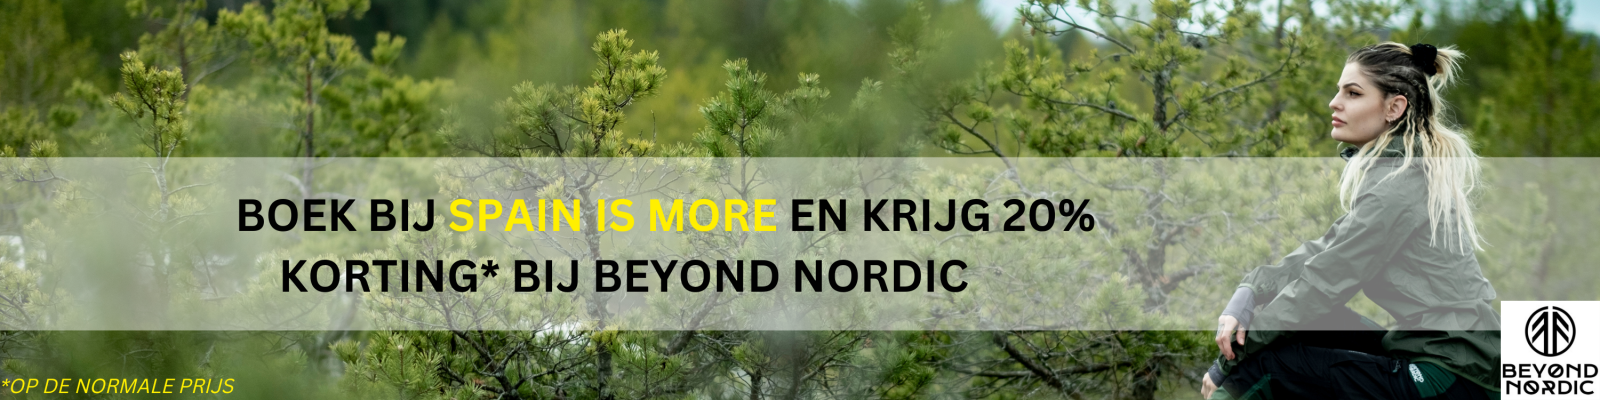 Spain Is More with Beyondnordic